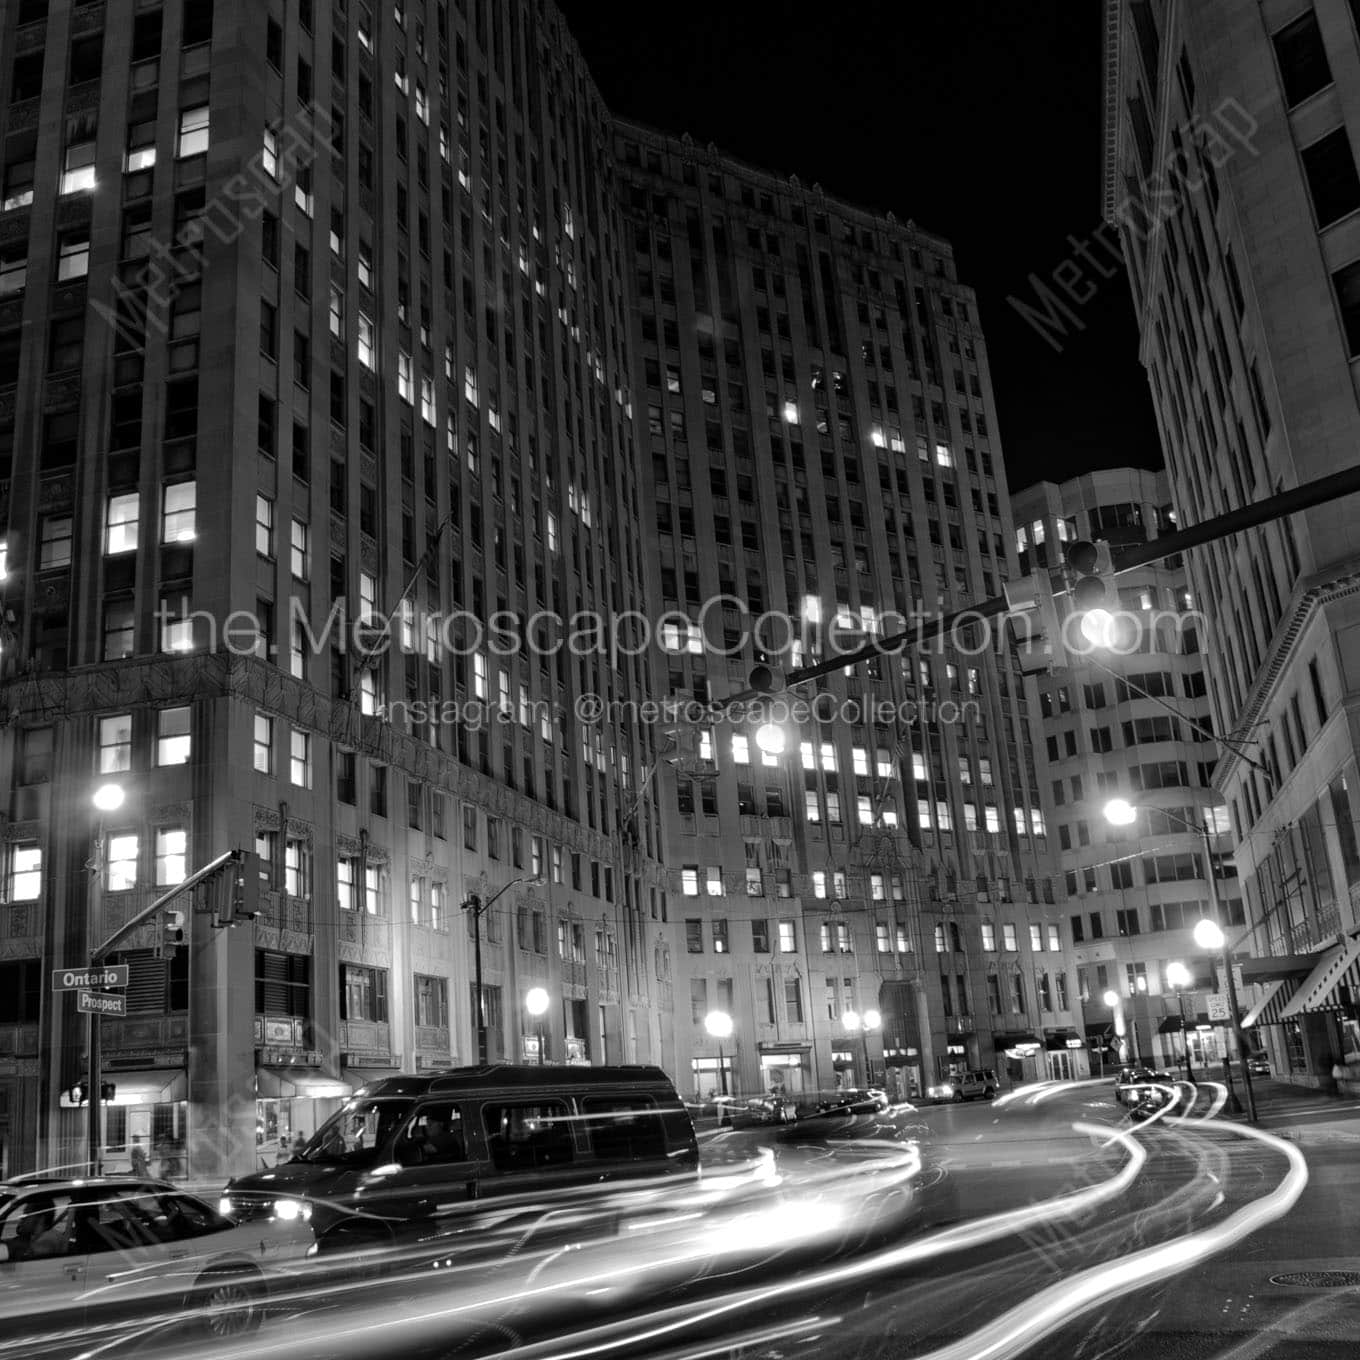 prospect ontario traffic downtown cleveland at night Black & White Wall Art